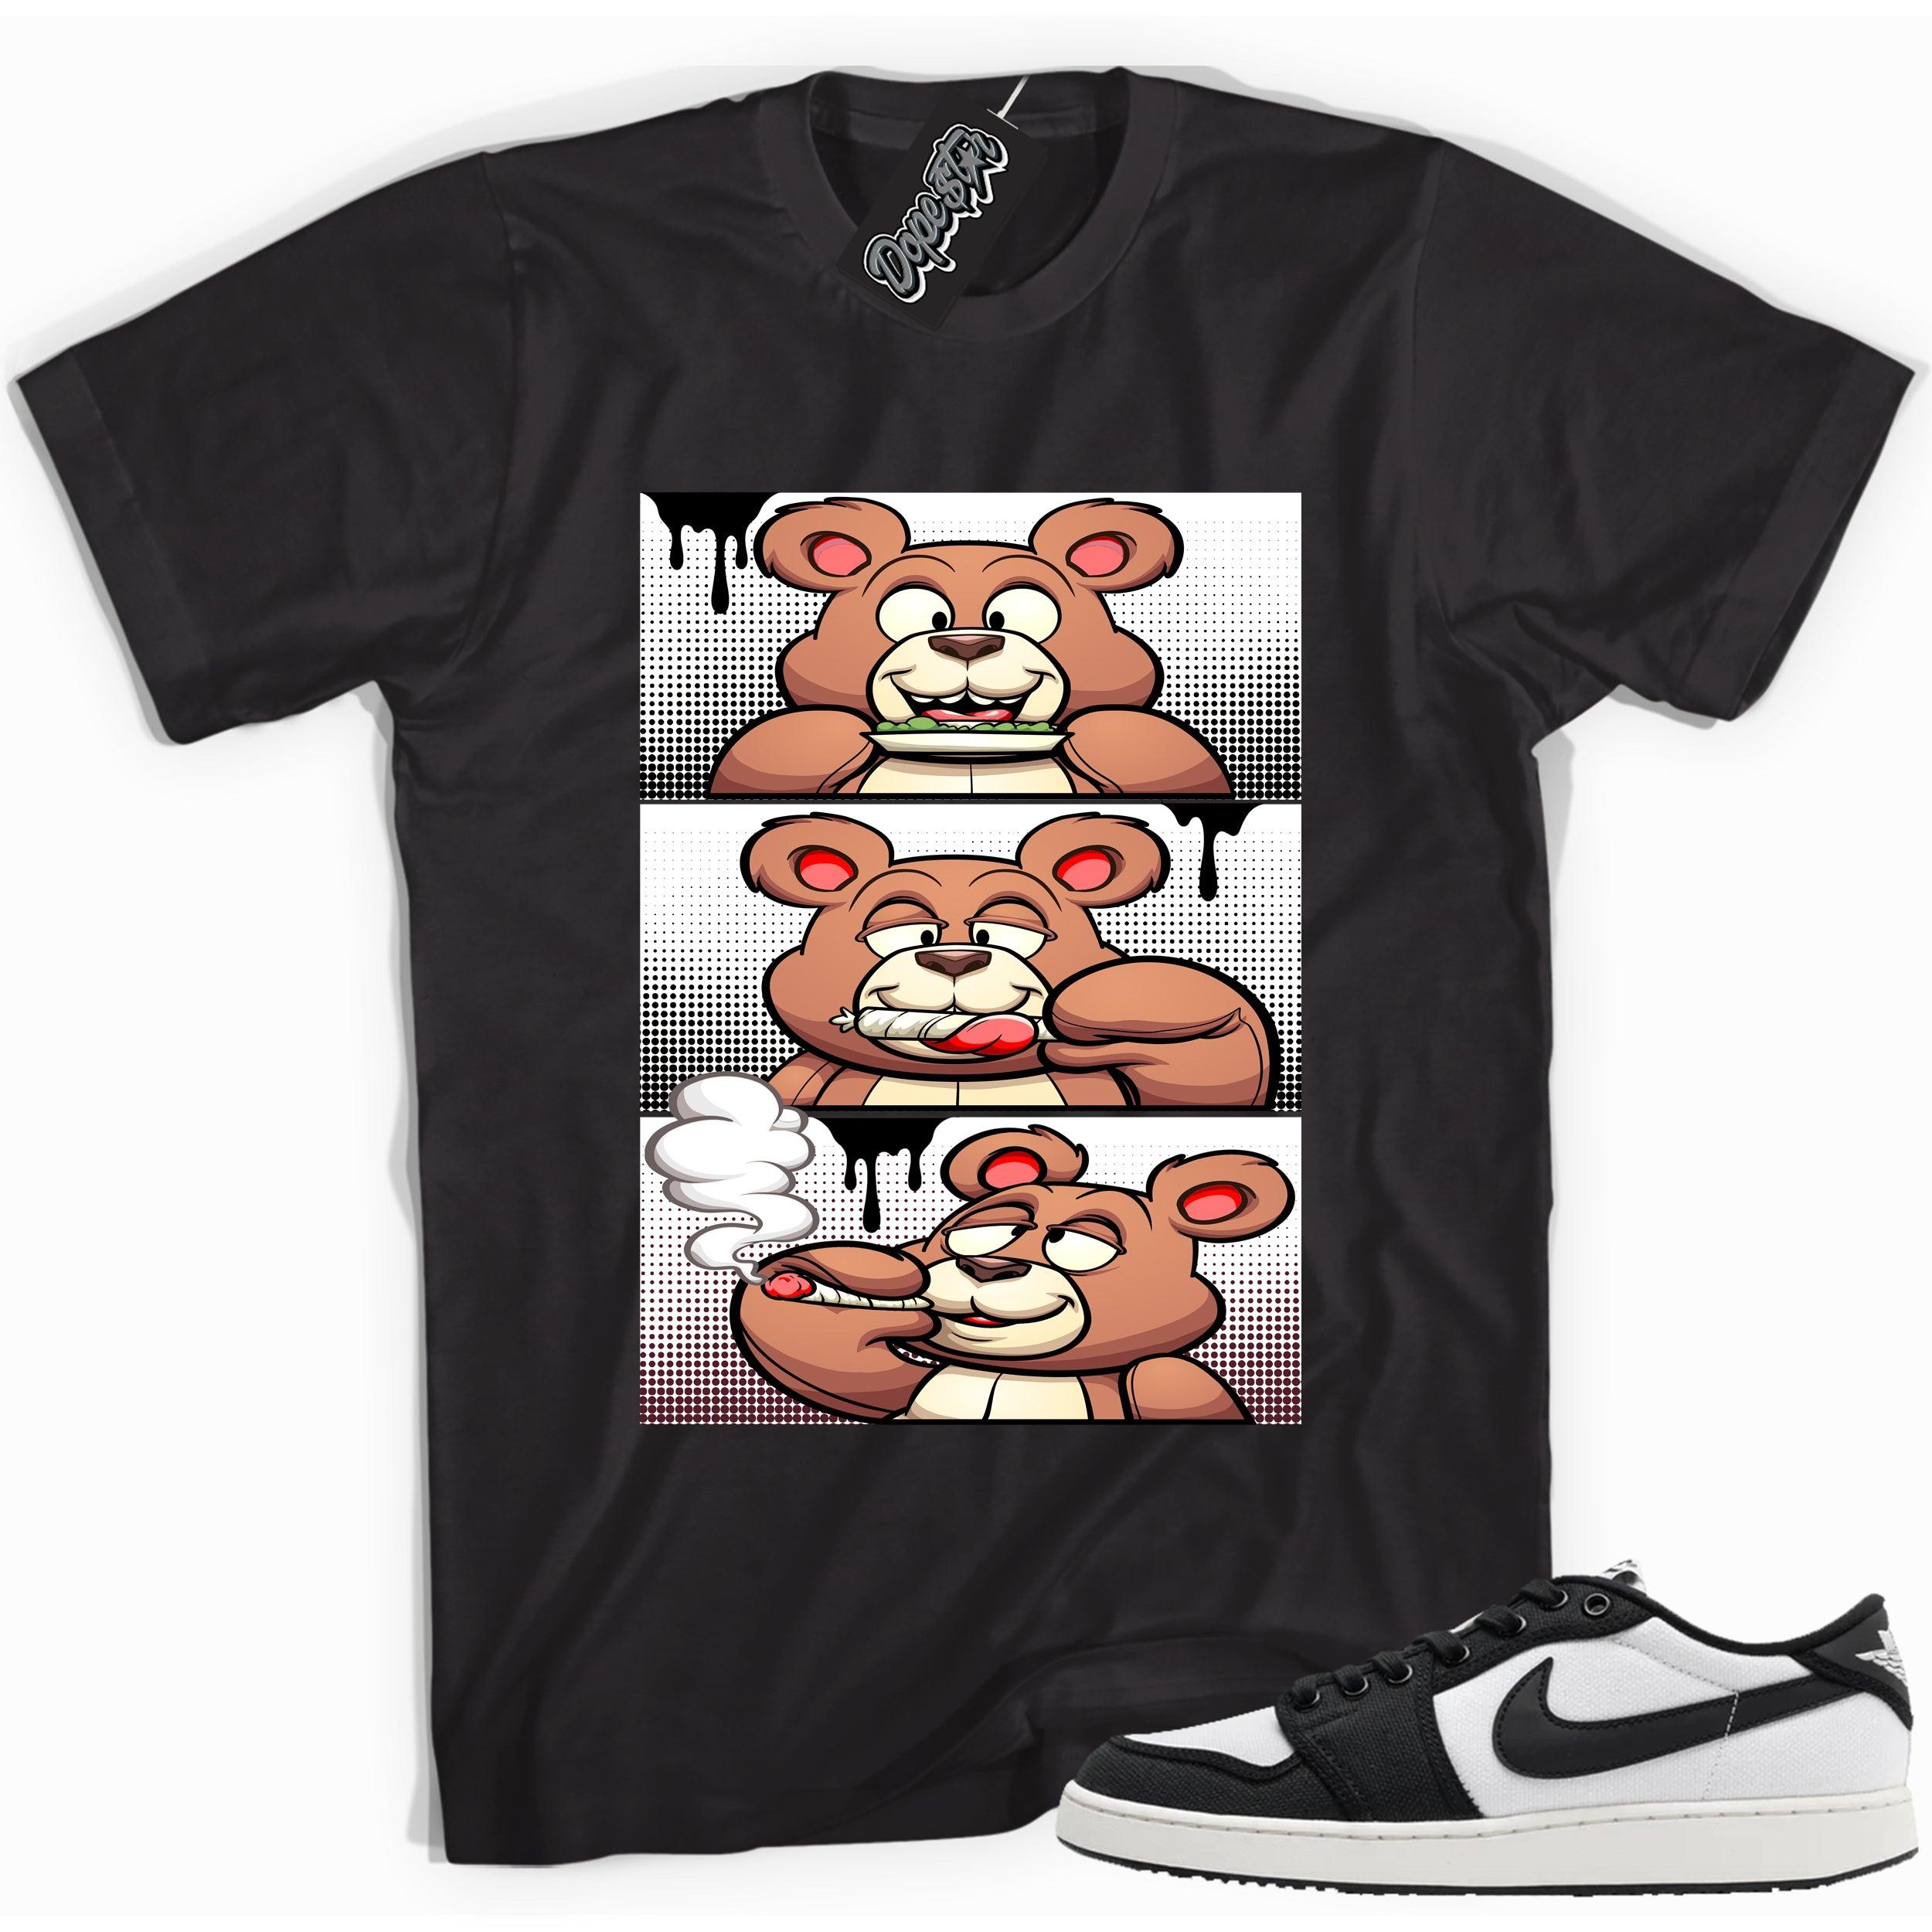 Cool black graphic tee with 'roll it lick it smoke it bear' print, that perfectly matches Air Jordan 1 Retro Ajko Low Black & White sneakers.